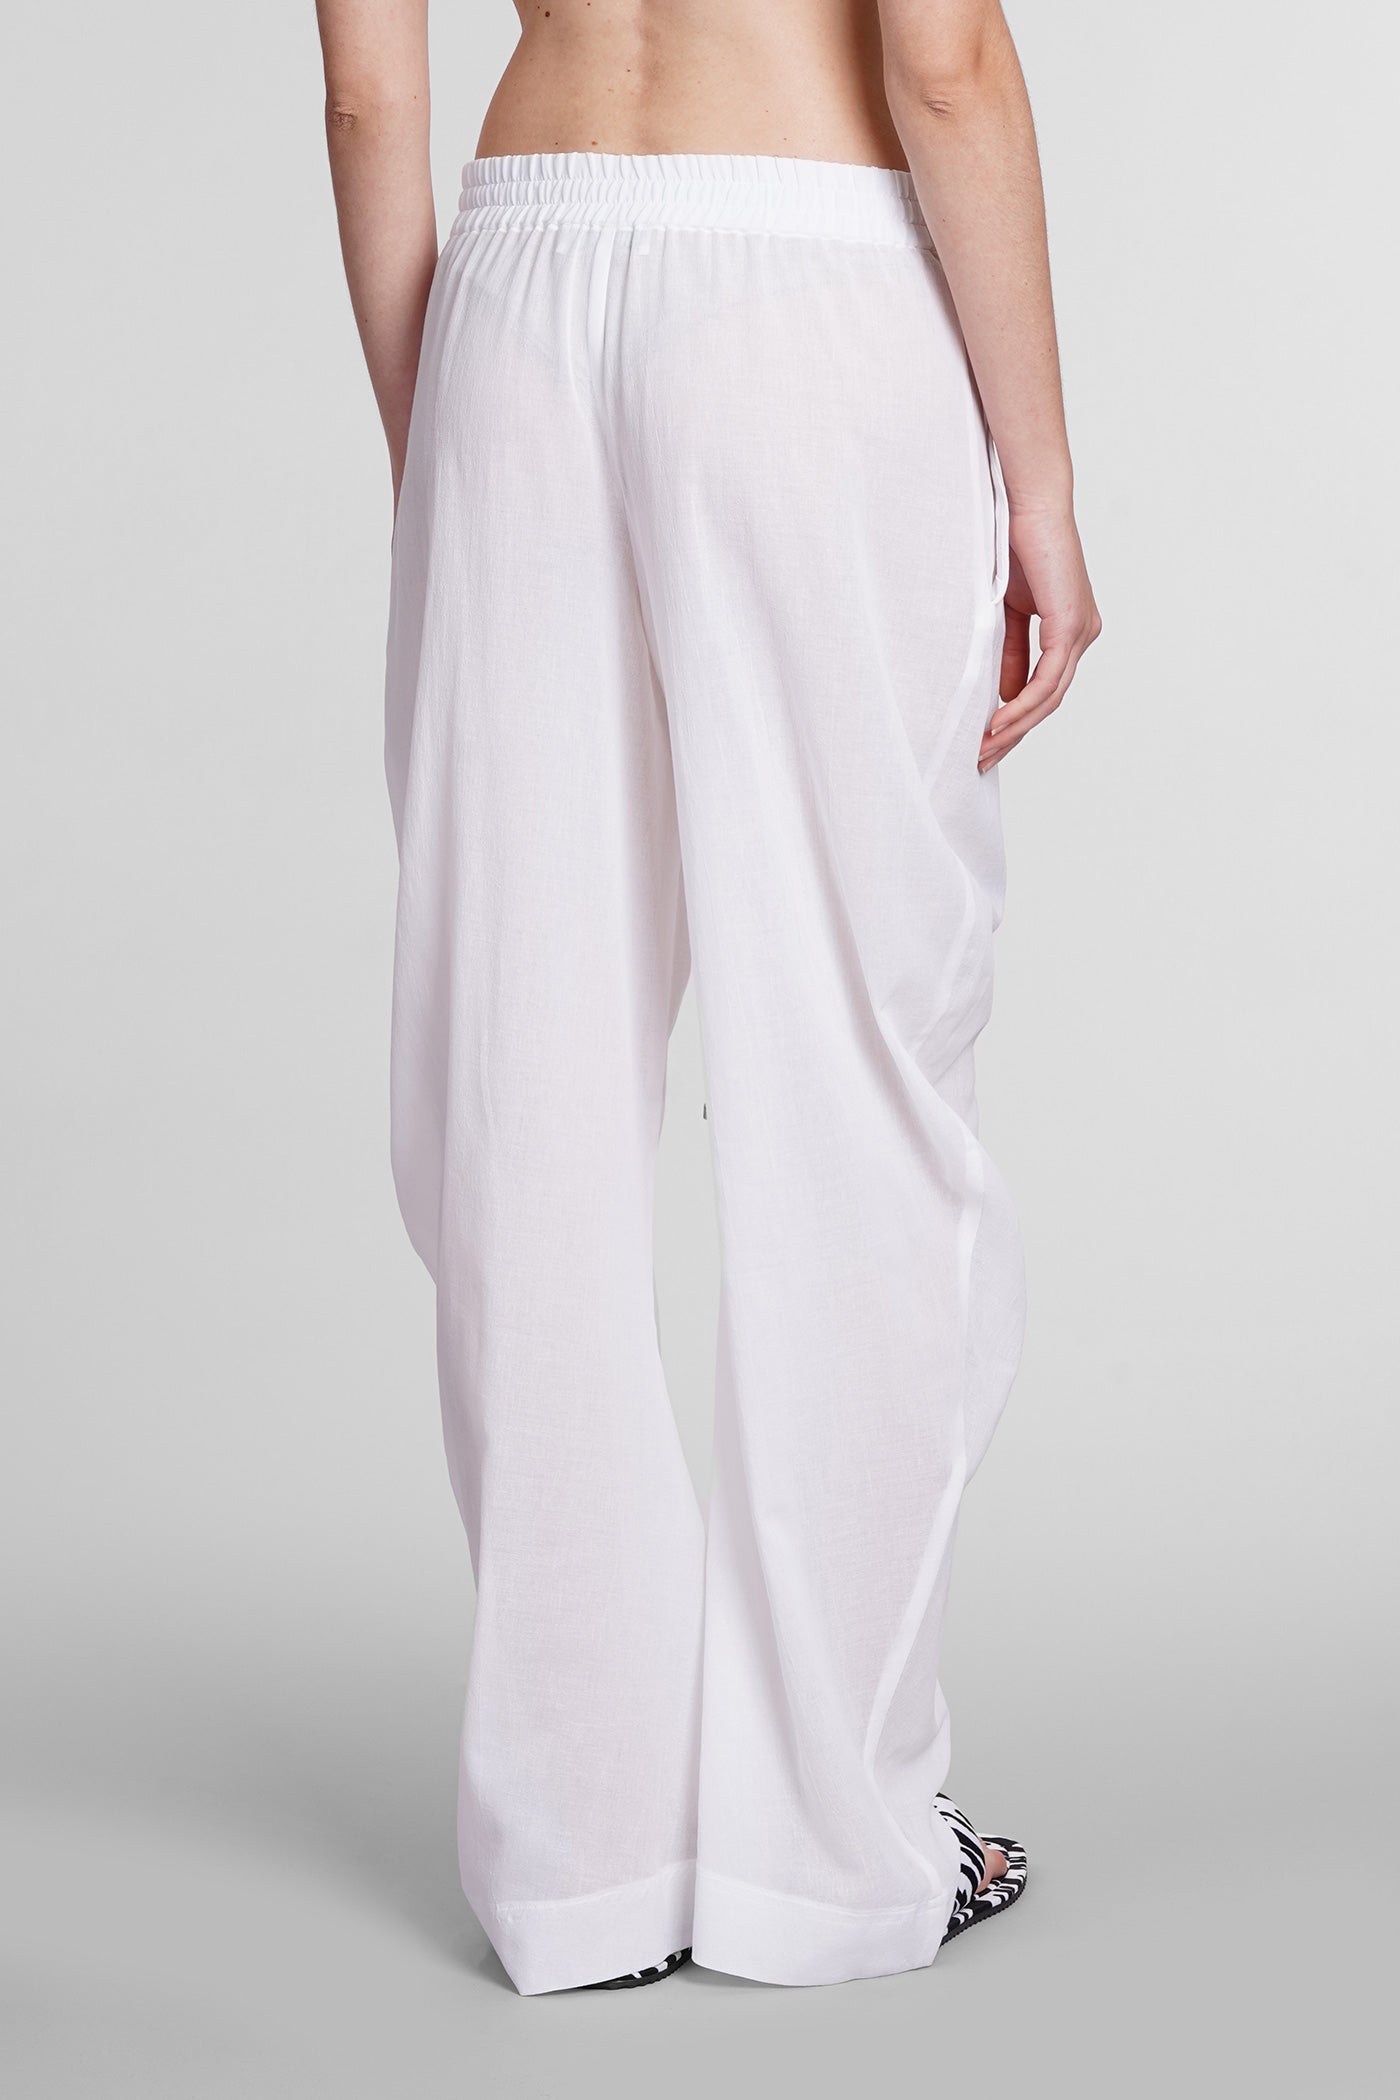 Pants in white cotton